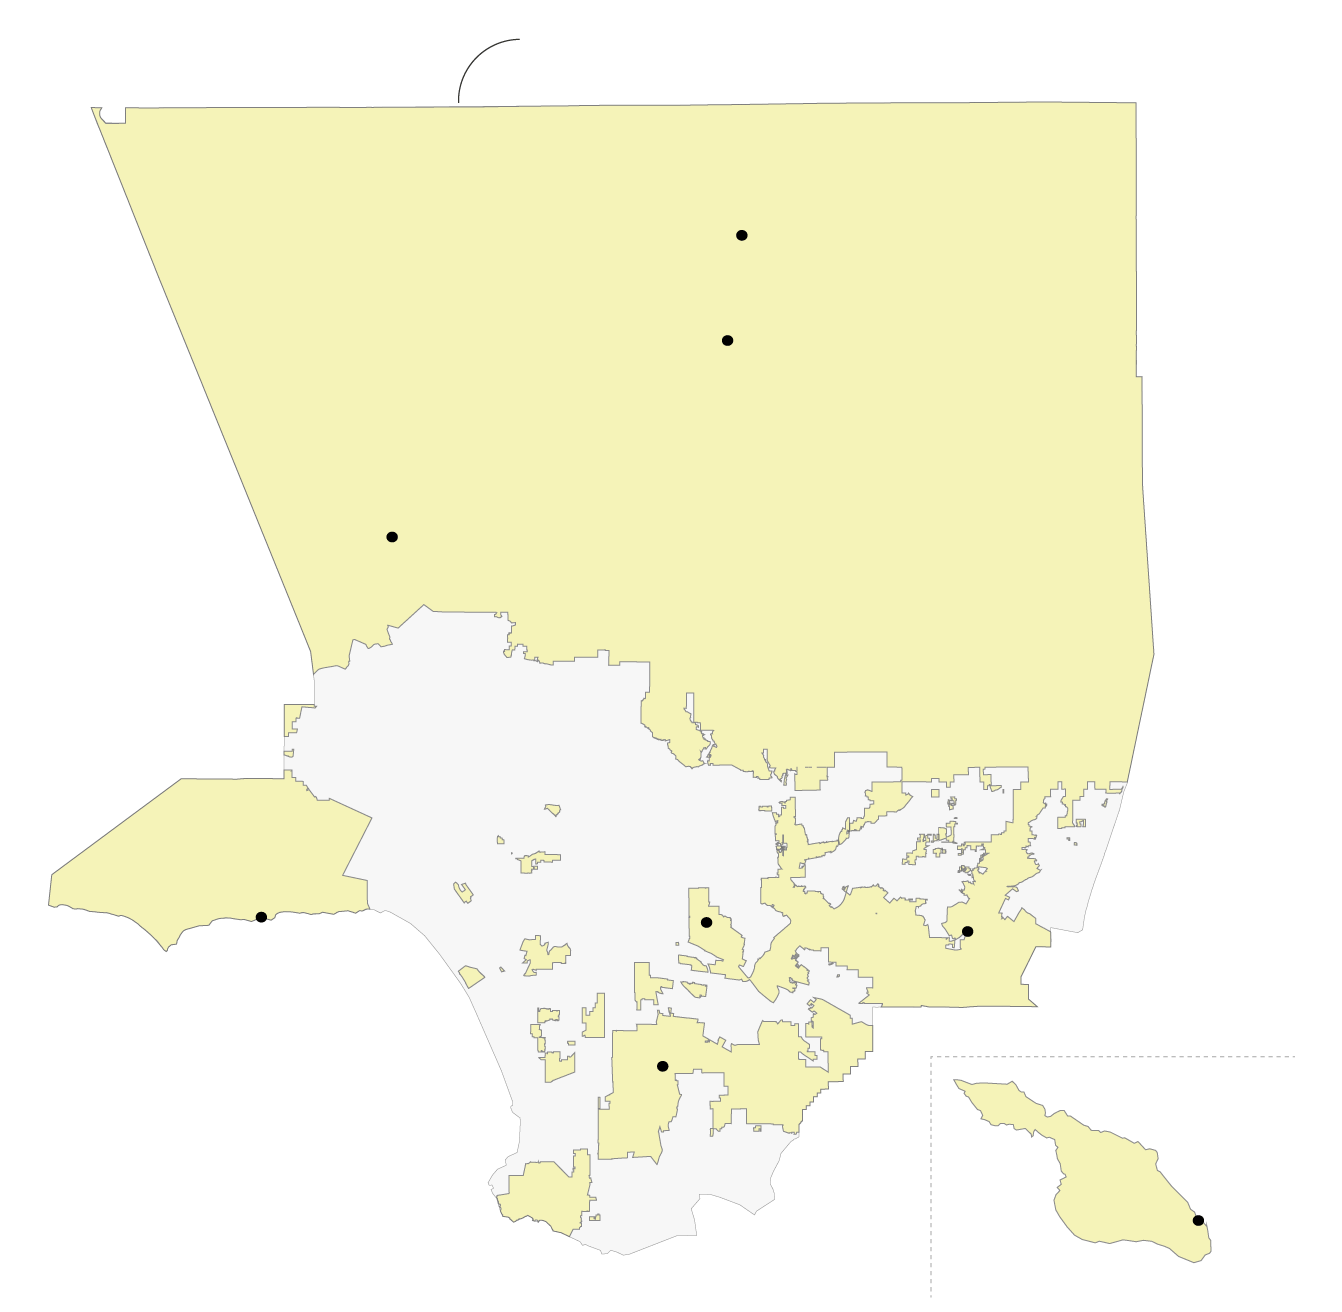 A map of Los Angeles County that shows areas where the Los Angeles Sheriff’s Department patrols the area. This area includes the northernmost areas of the County, along with a patchwork of areas in East and South L.A. Lancaster, Palmdale, Santa Clarita, Malibu, East Los Angeles, Walnut, Compton, and Avalon are in this jurisdiction.